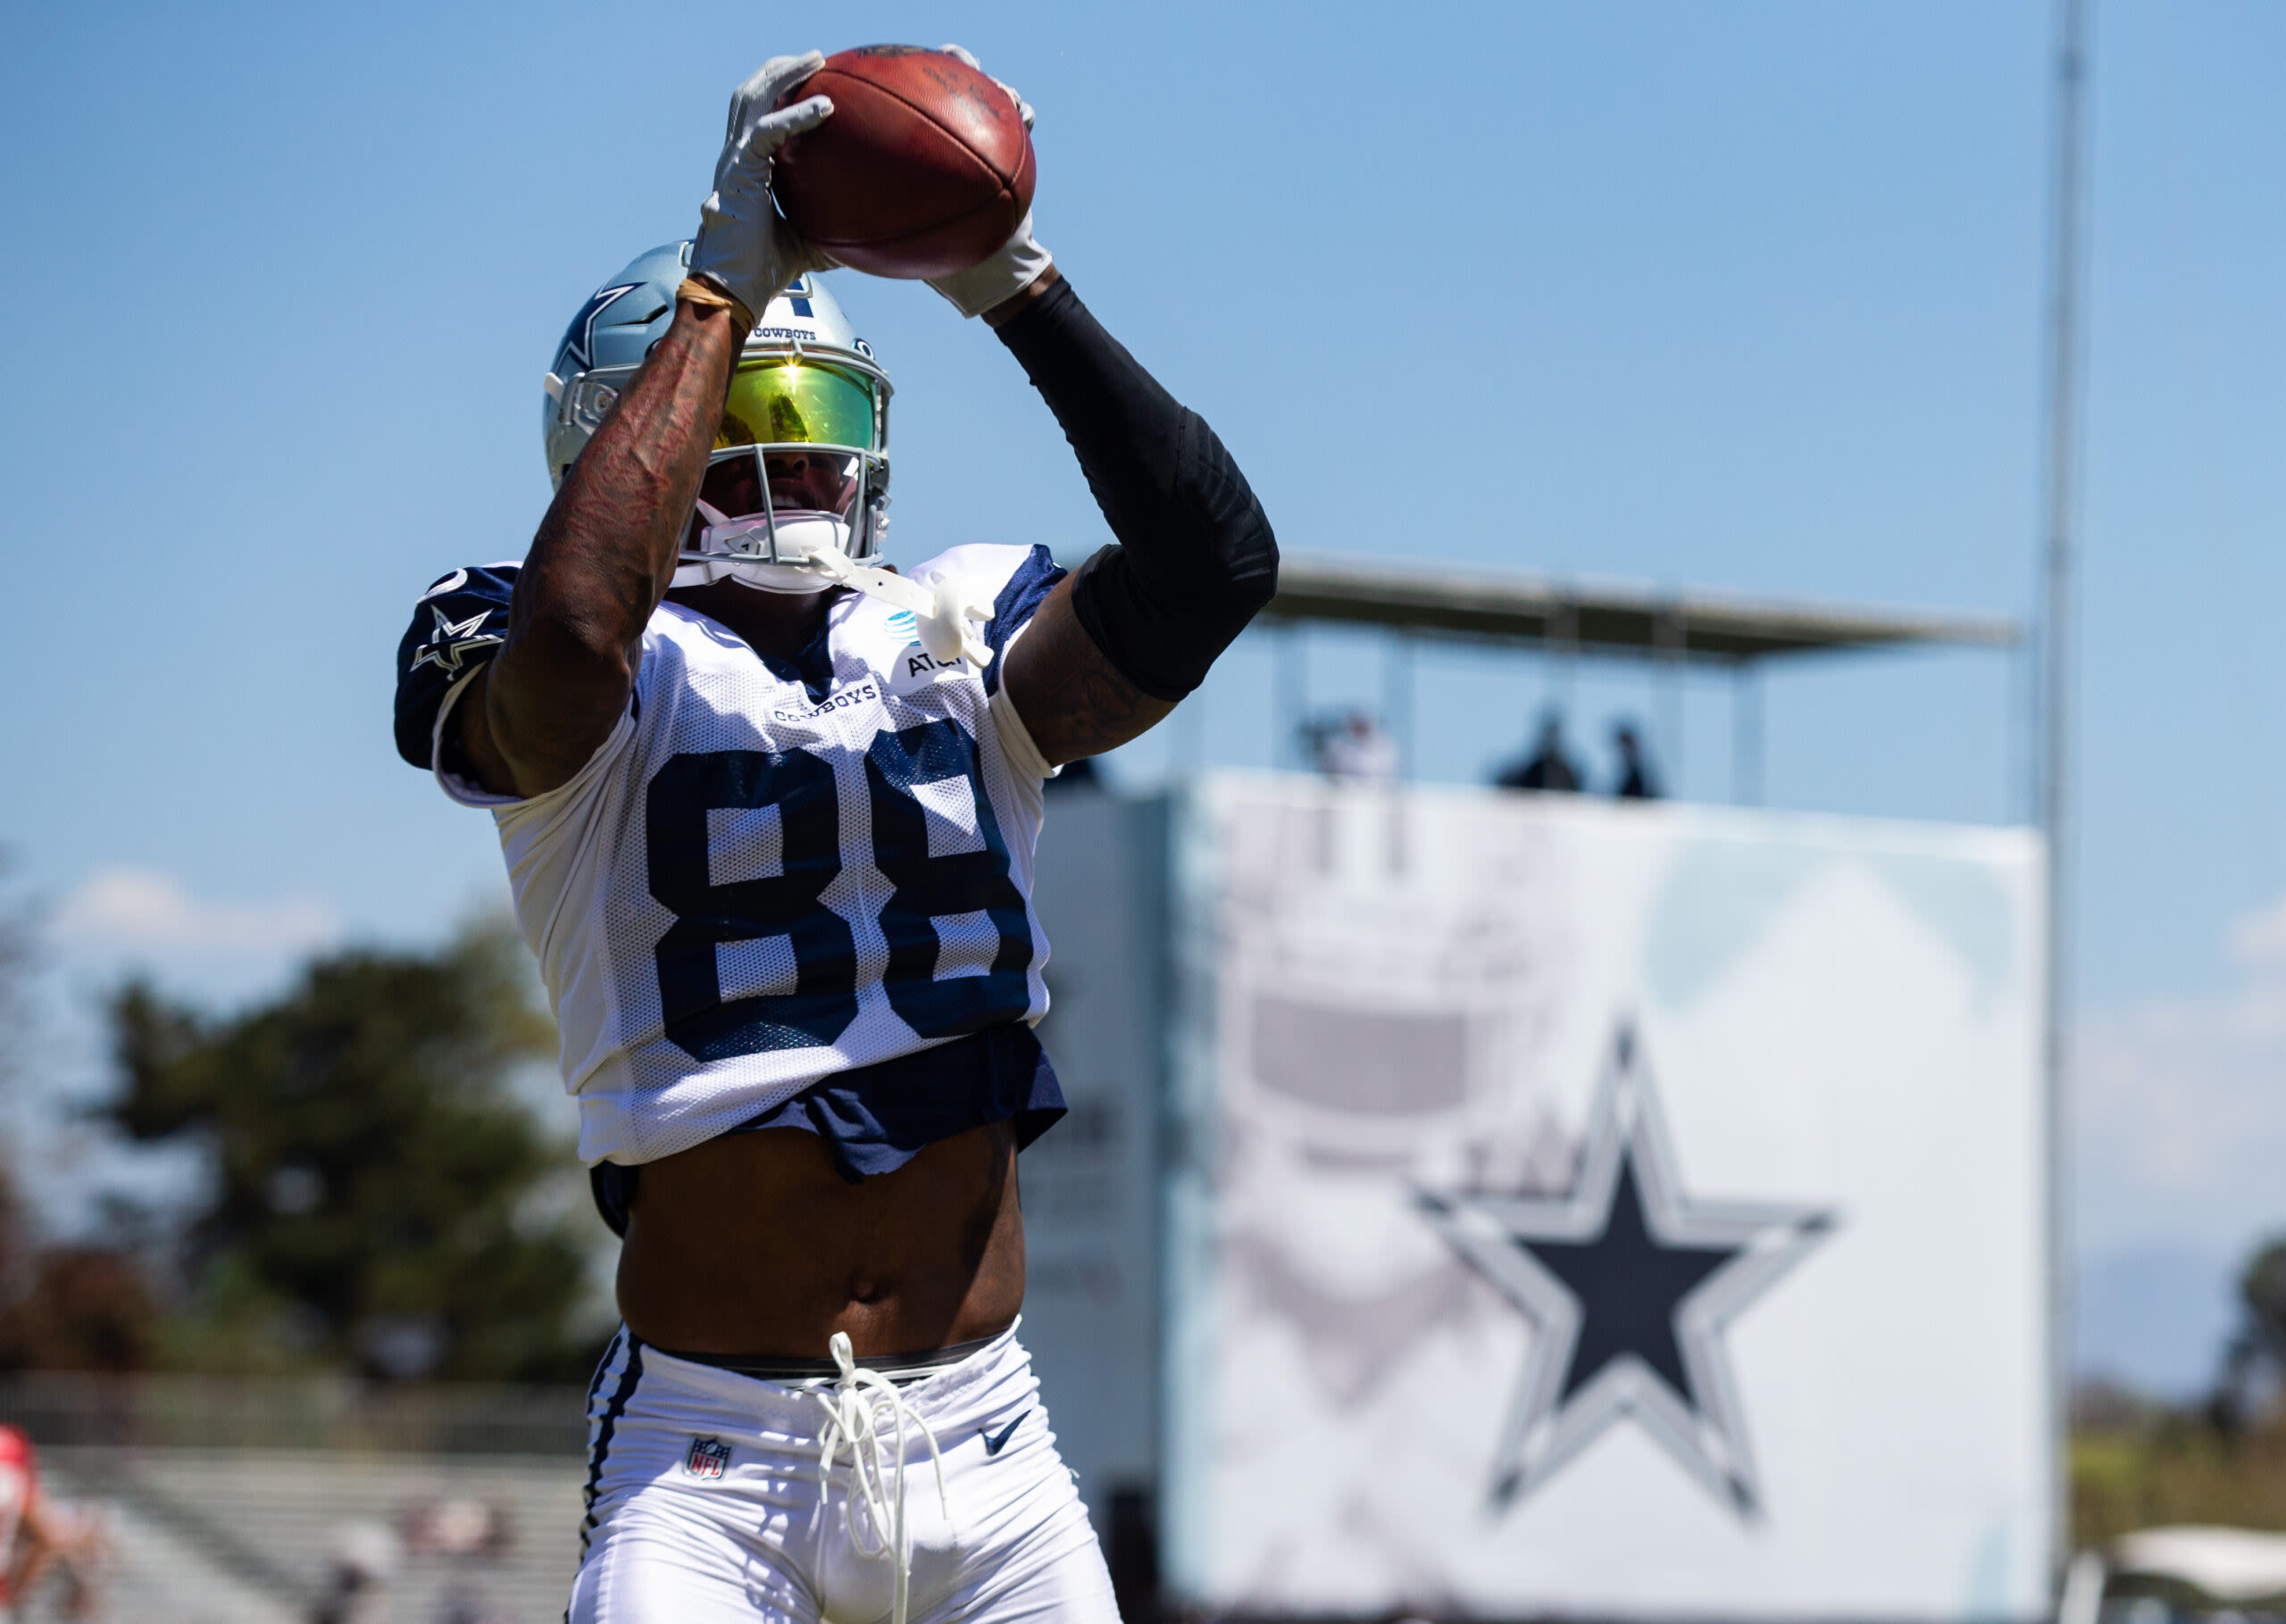 Report suggests Cowboys WR CeeDee Lamb may holdout of training camp